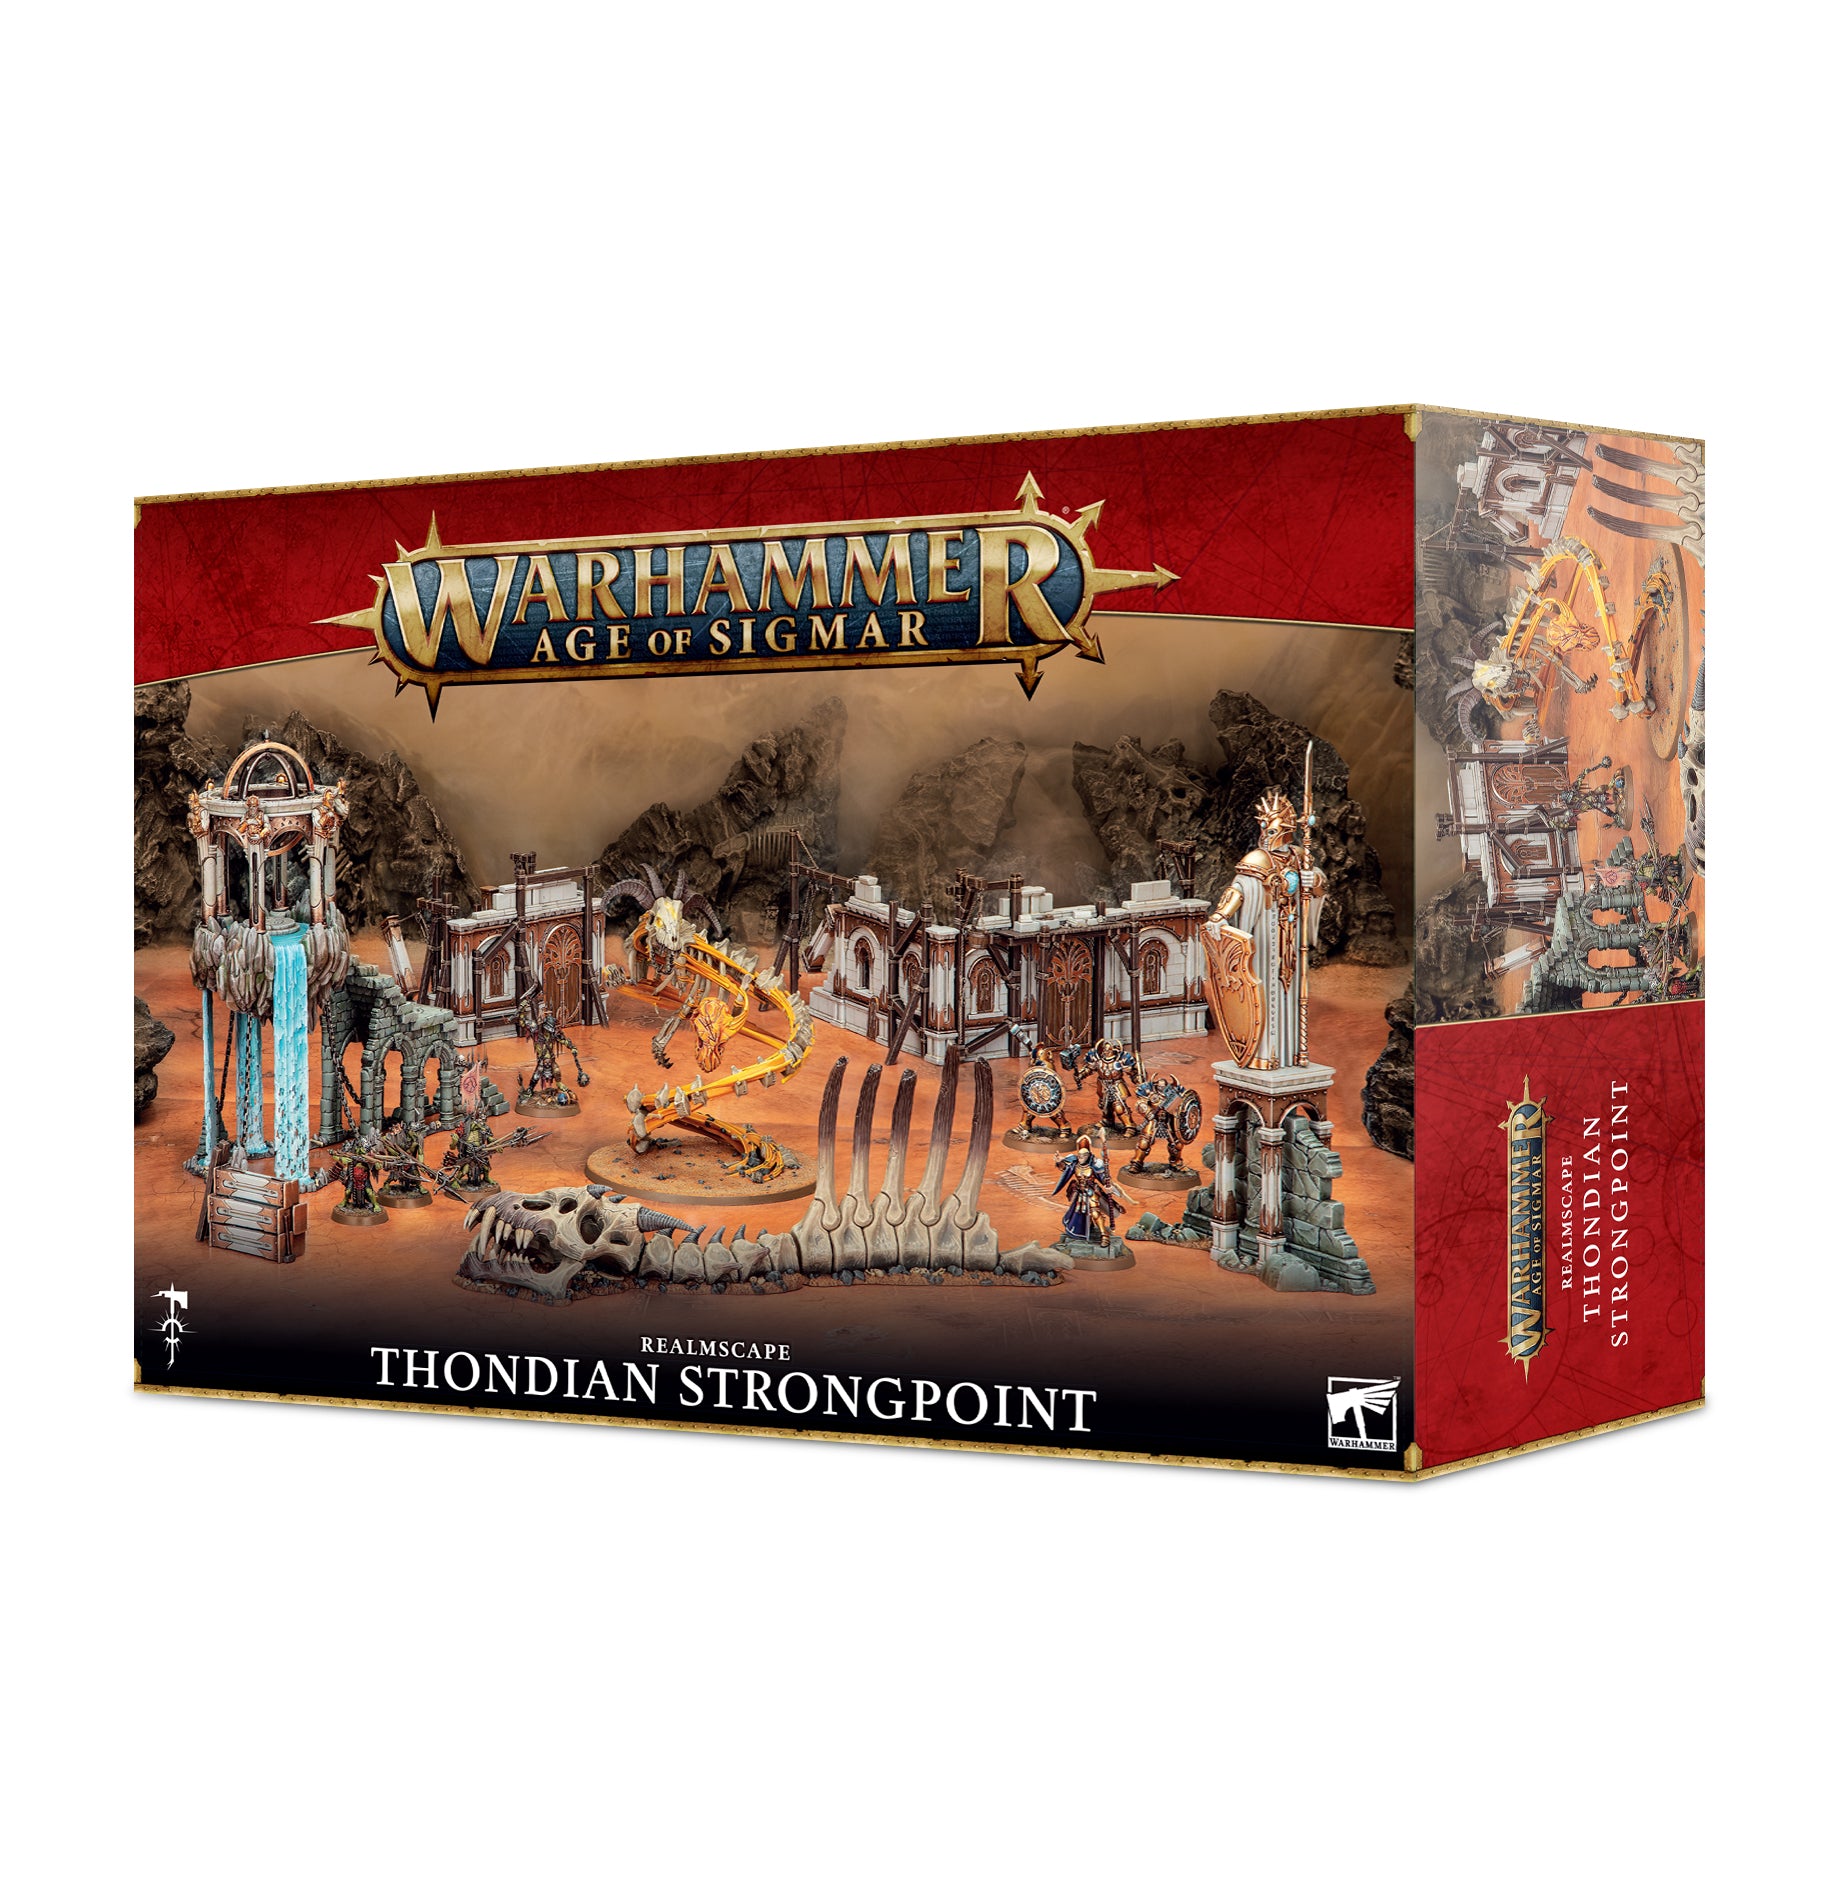 Warhammer Age of Sigmar Realmscape: Thondian Strongpoint - Bards & Cards